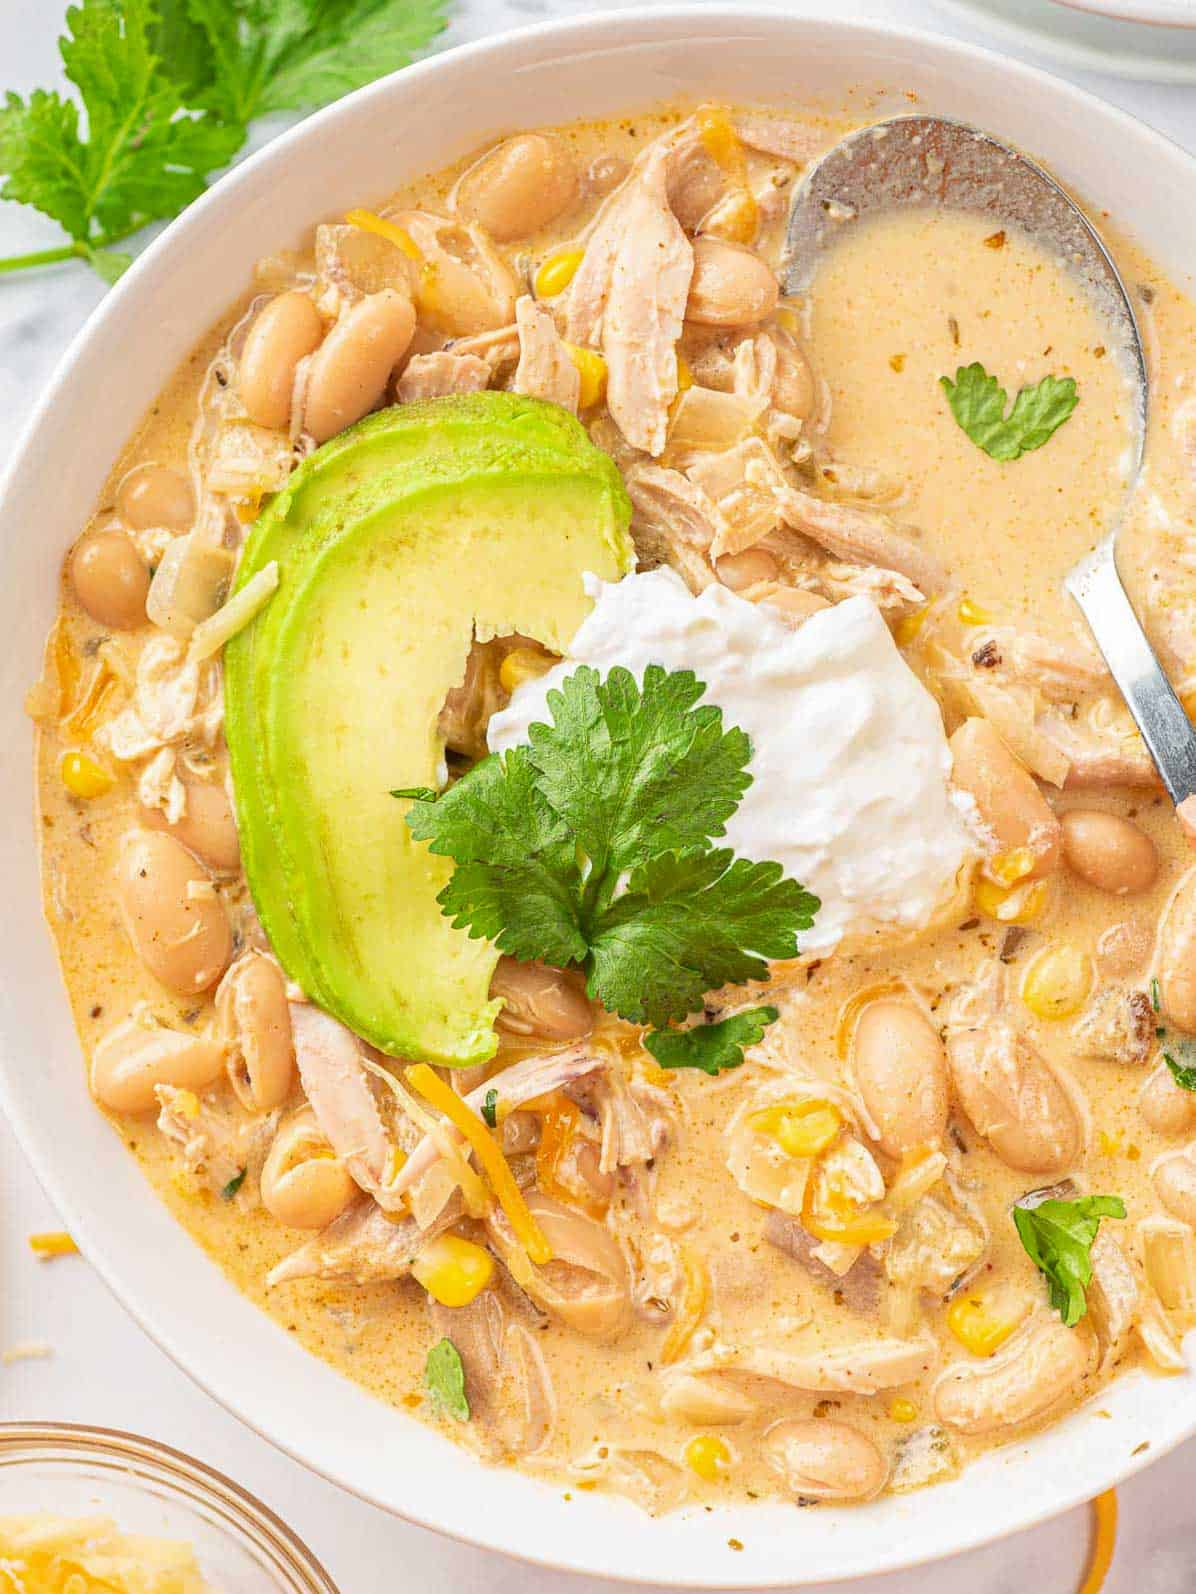 https://www.cookinwithmima.com/wp-content/uploads/2021/09/Easy-White-Chicken-Chili-Recipe.jpg